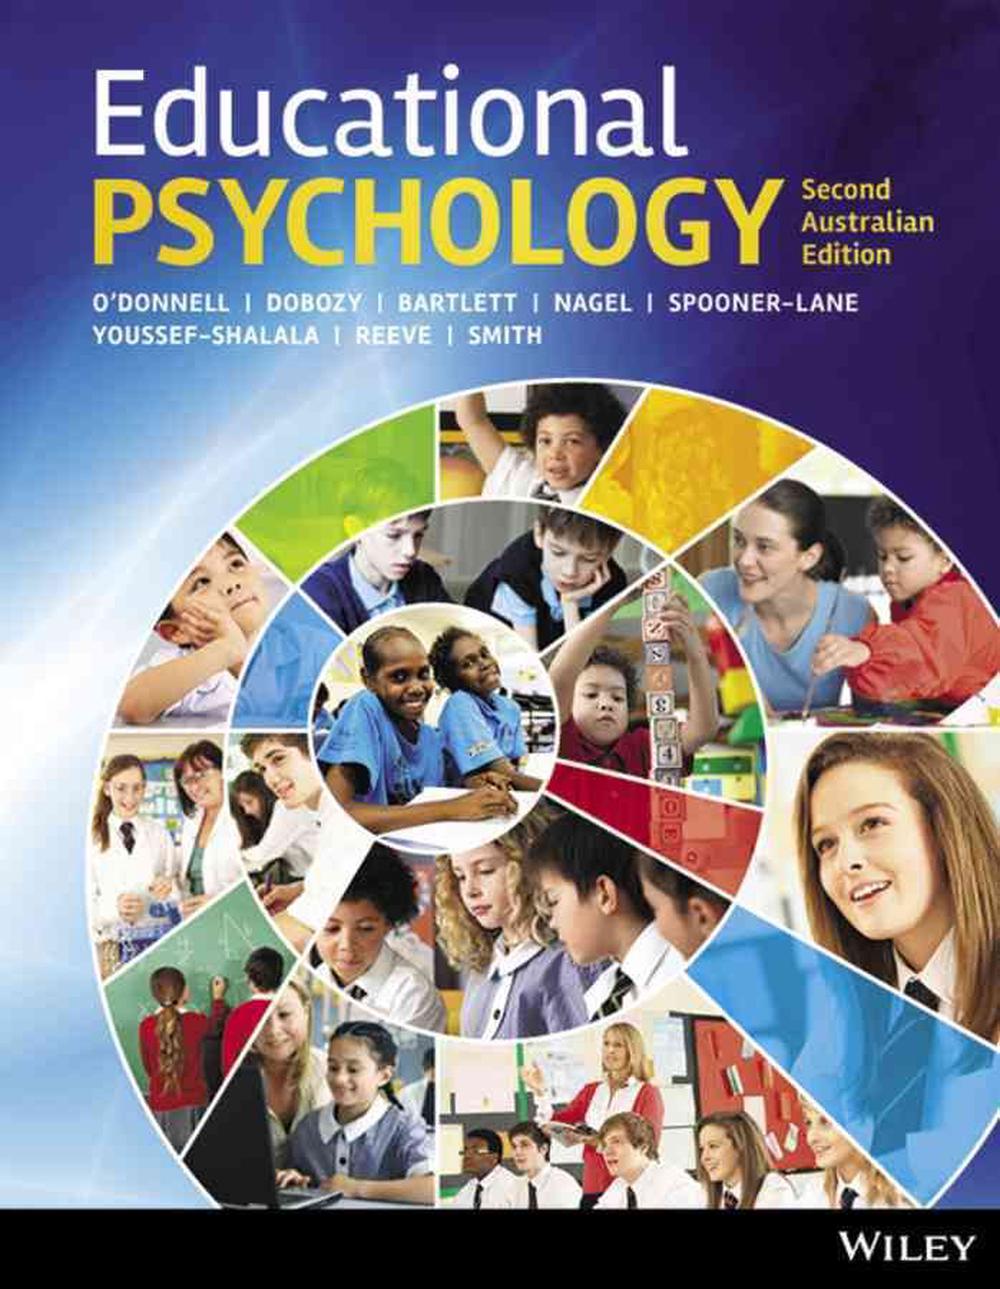 articles about educational psychology